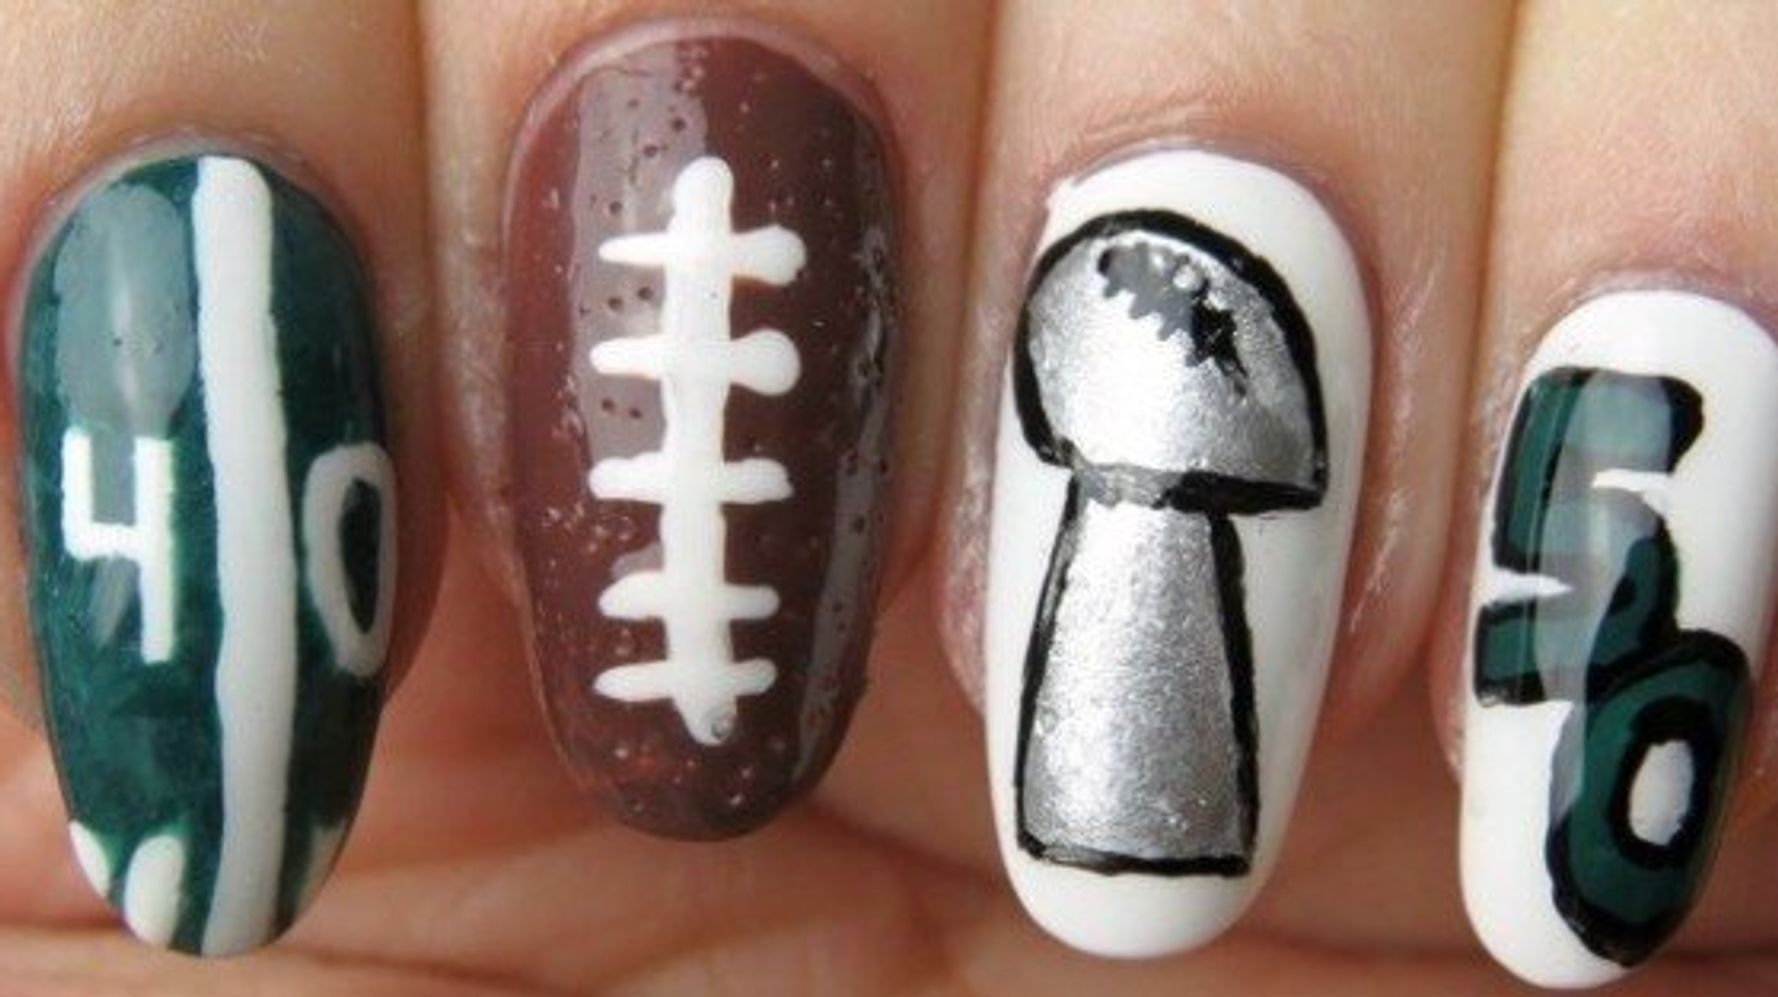 Nail salons are busy and creative making detailed Eagles designs ahead of  Super Bowl